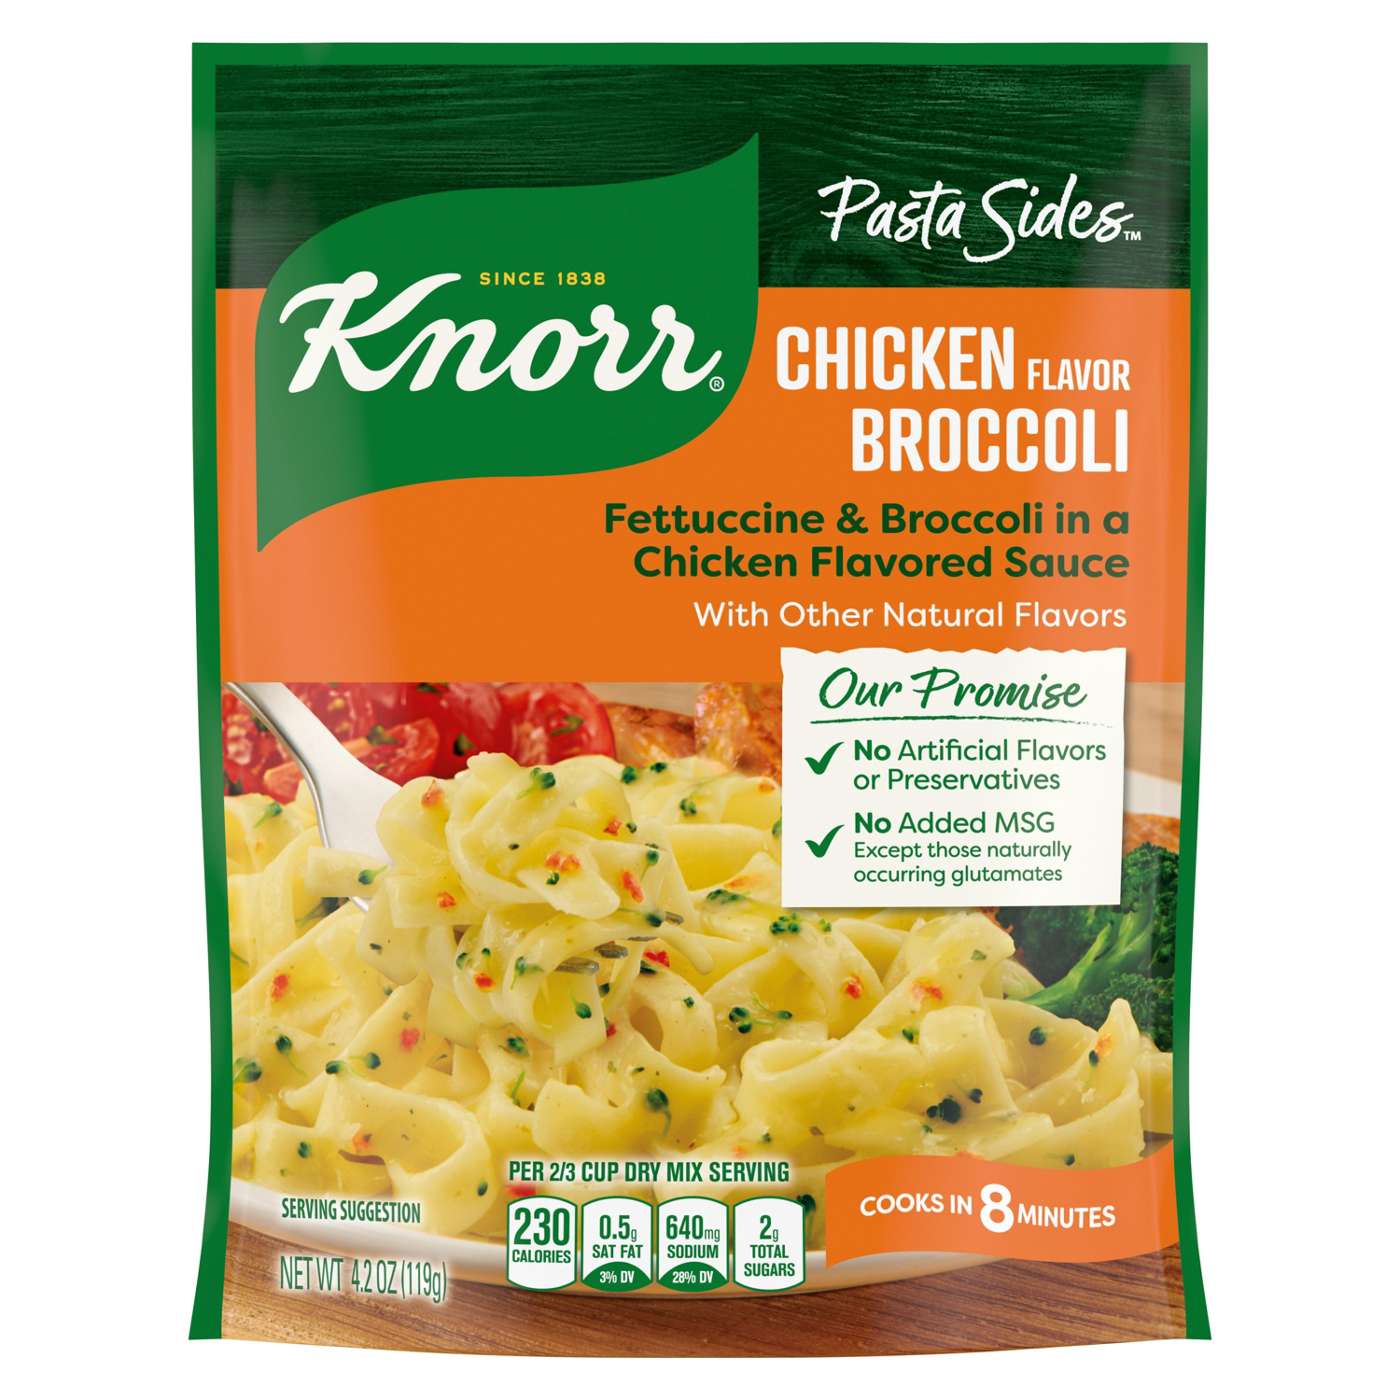 Knorr Chicken Broccoli Pasta Sides; image 1 of 4